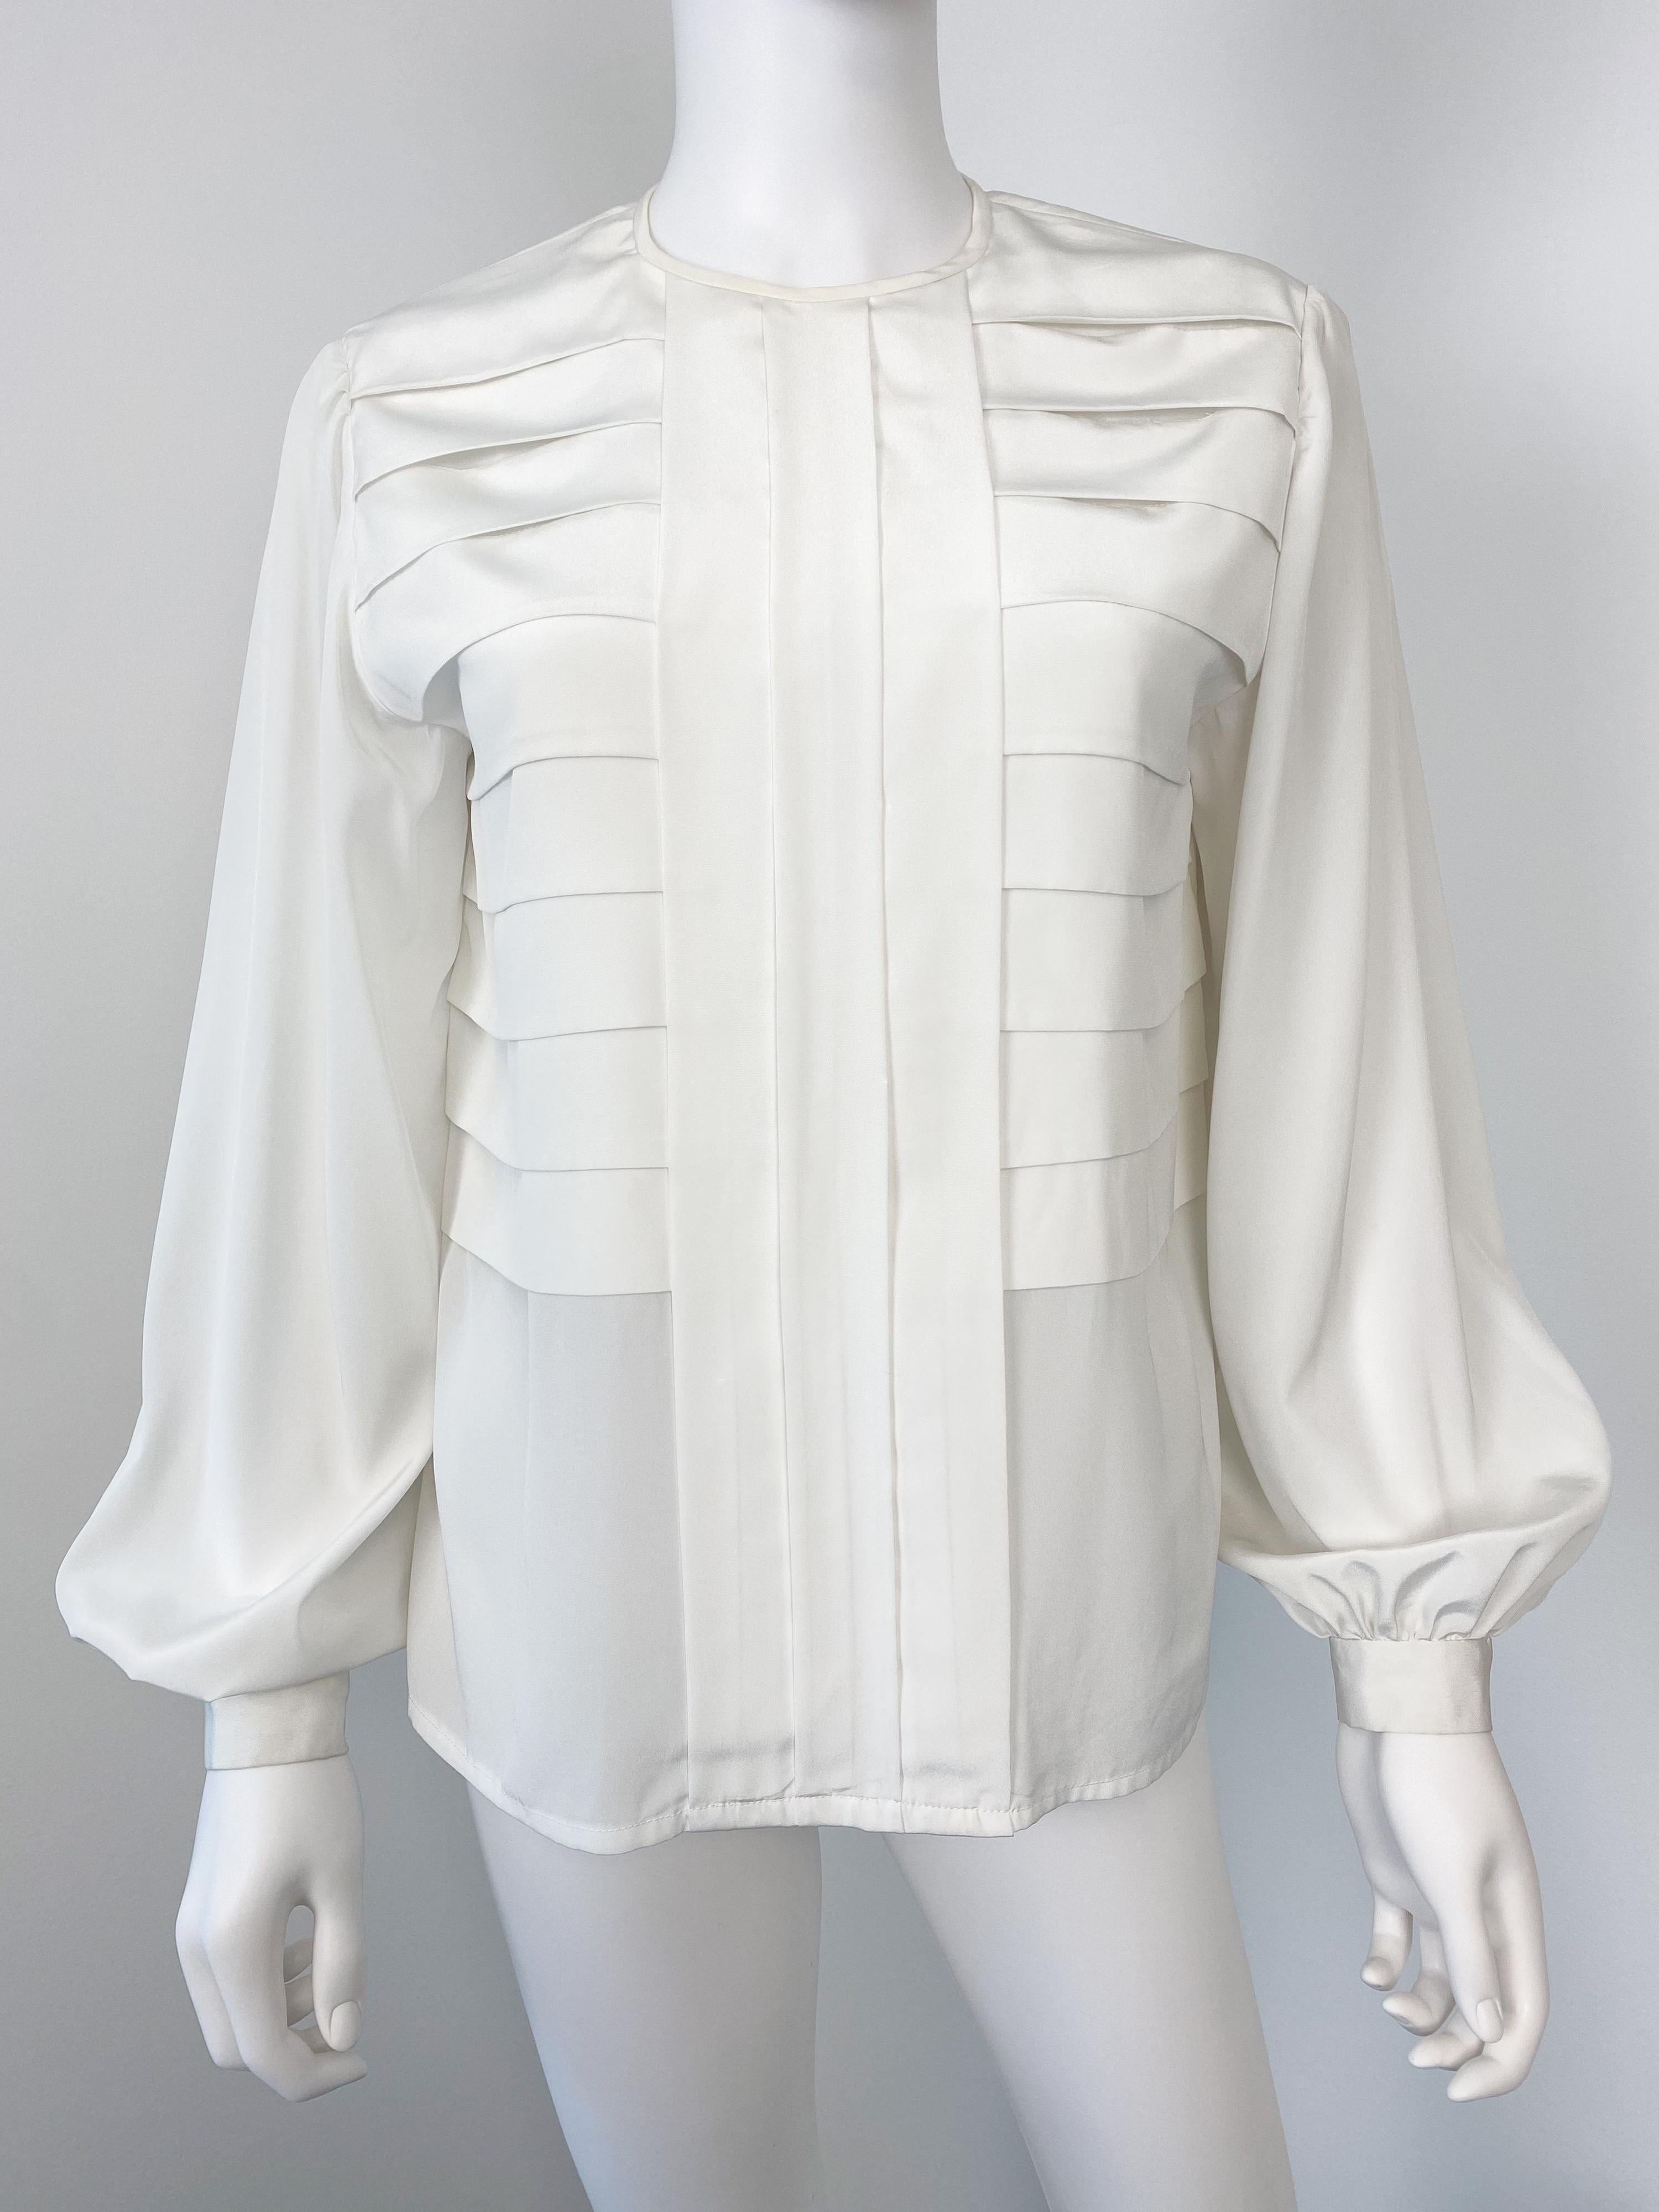 Vintage 1970s Silky Polyester Blouse Top White Origami Pleat Size 10/12 For Sale 4